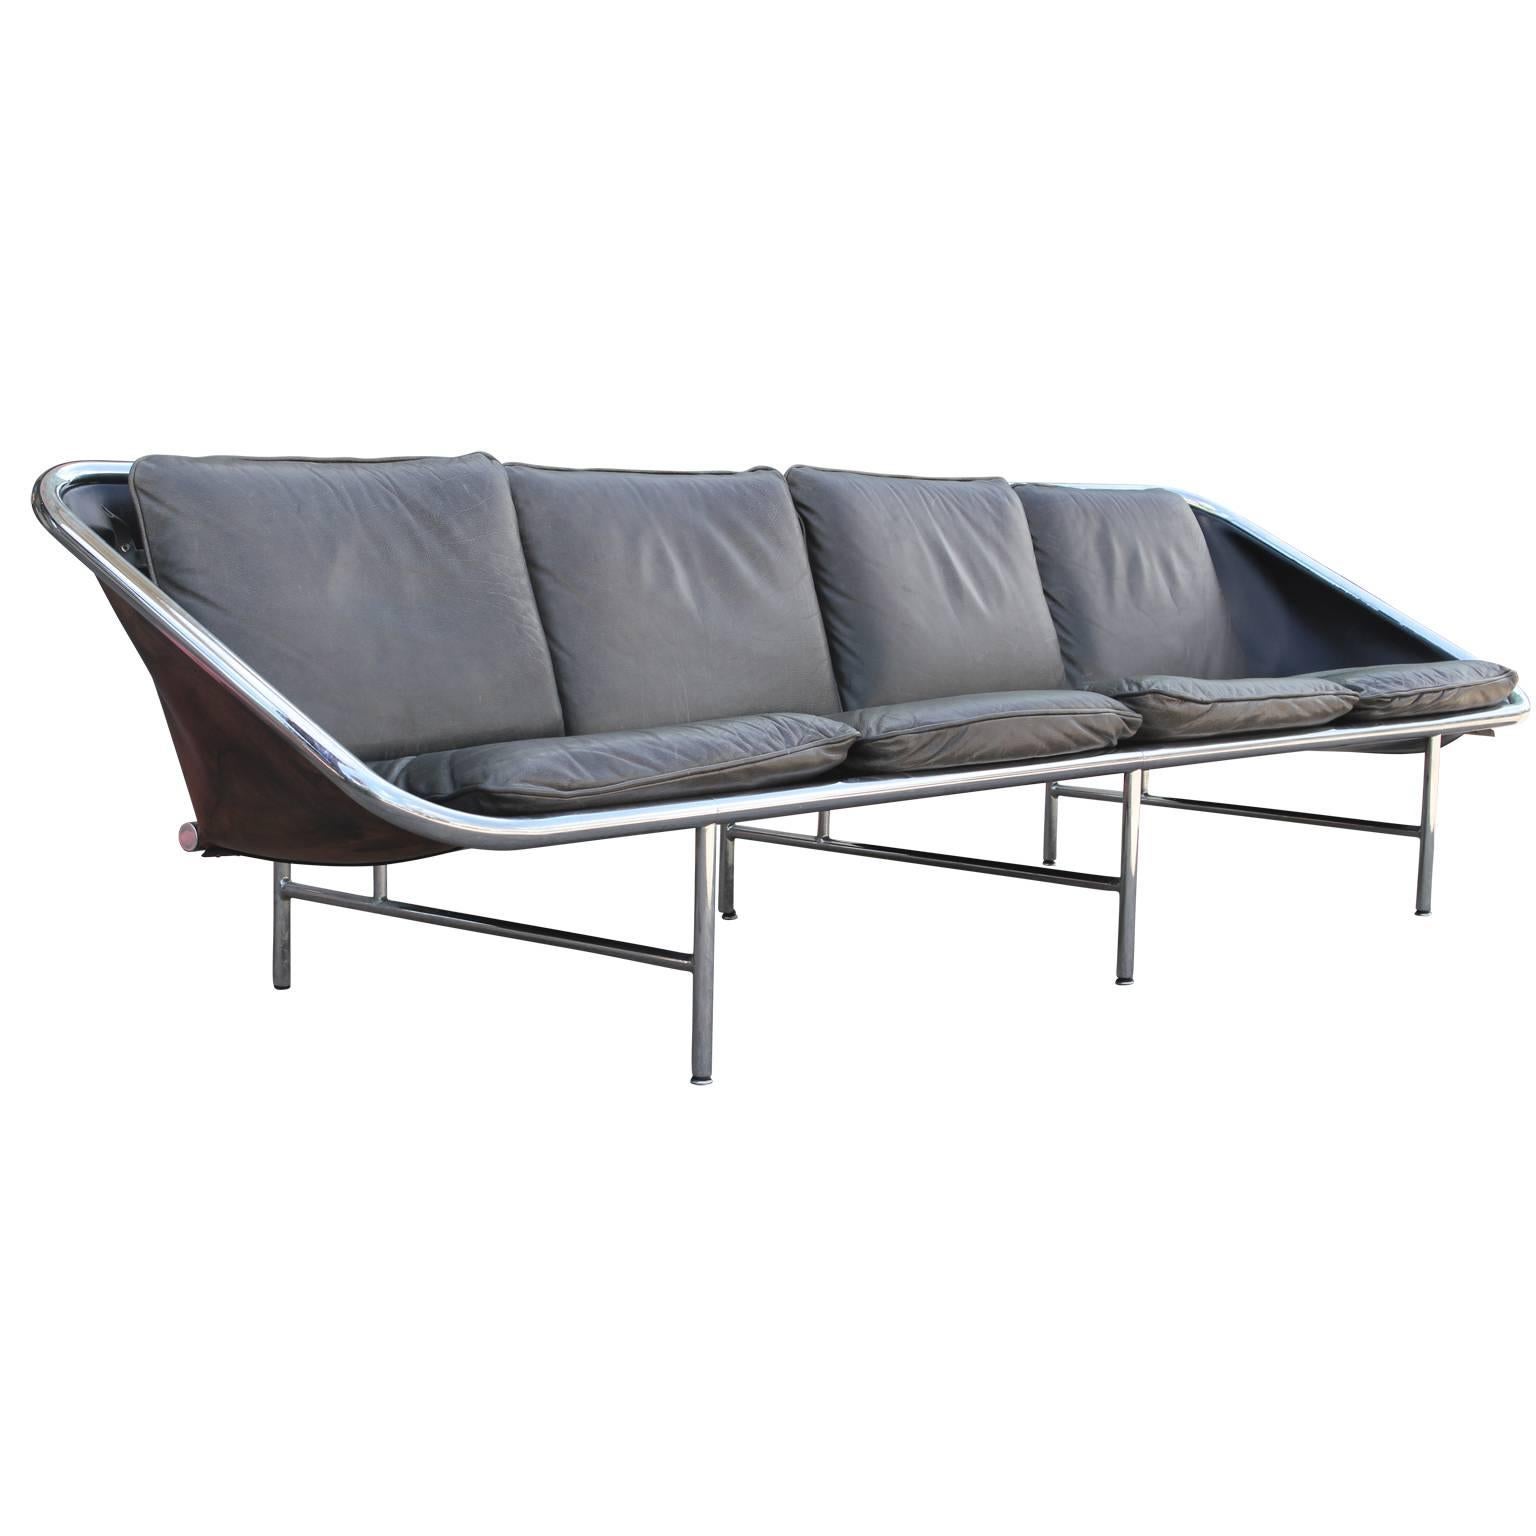 American Modern George Nelson for Herman Miller IBM Chrome and Leather Sling Sofa